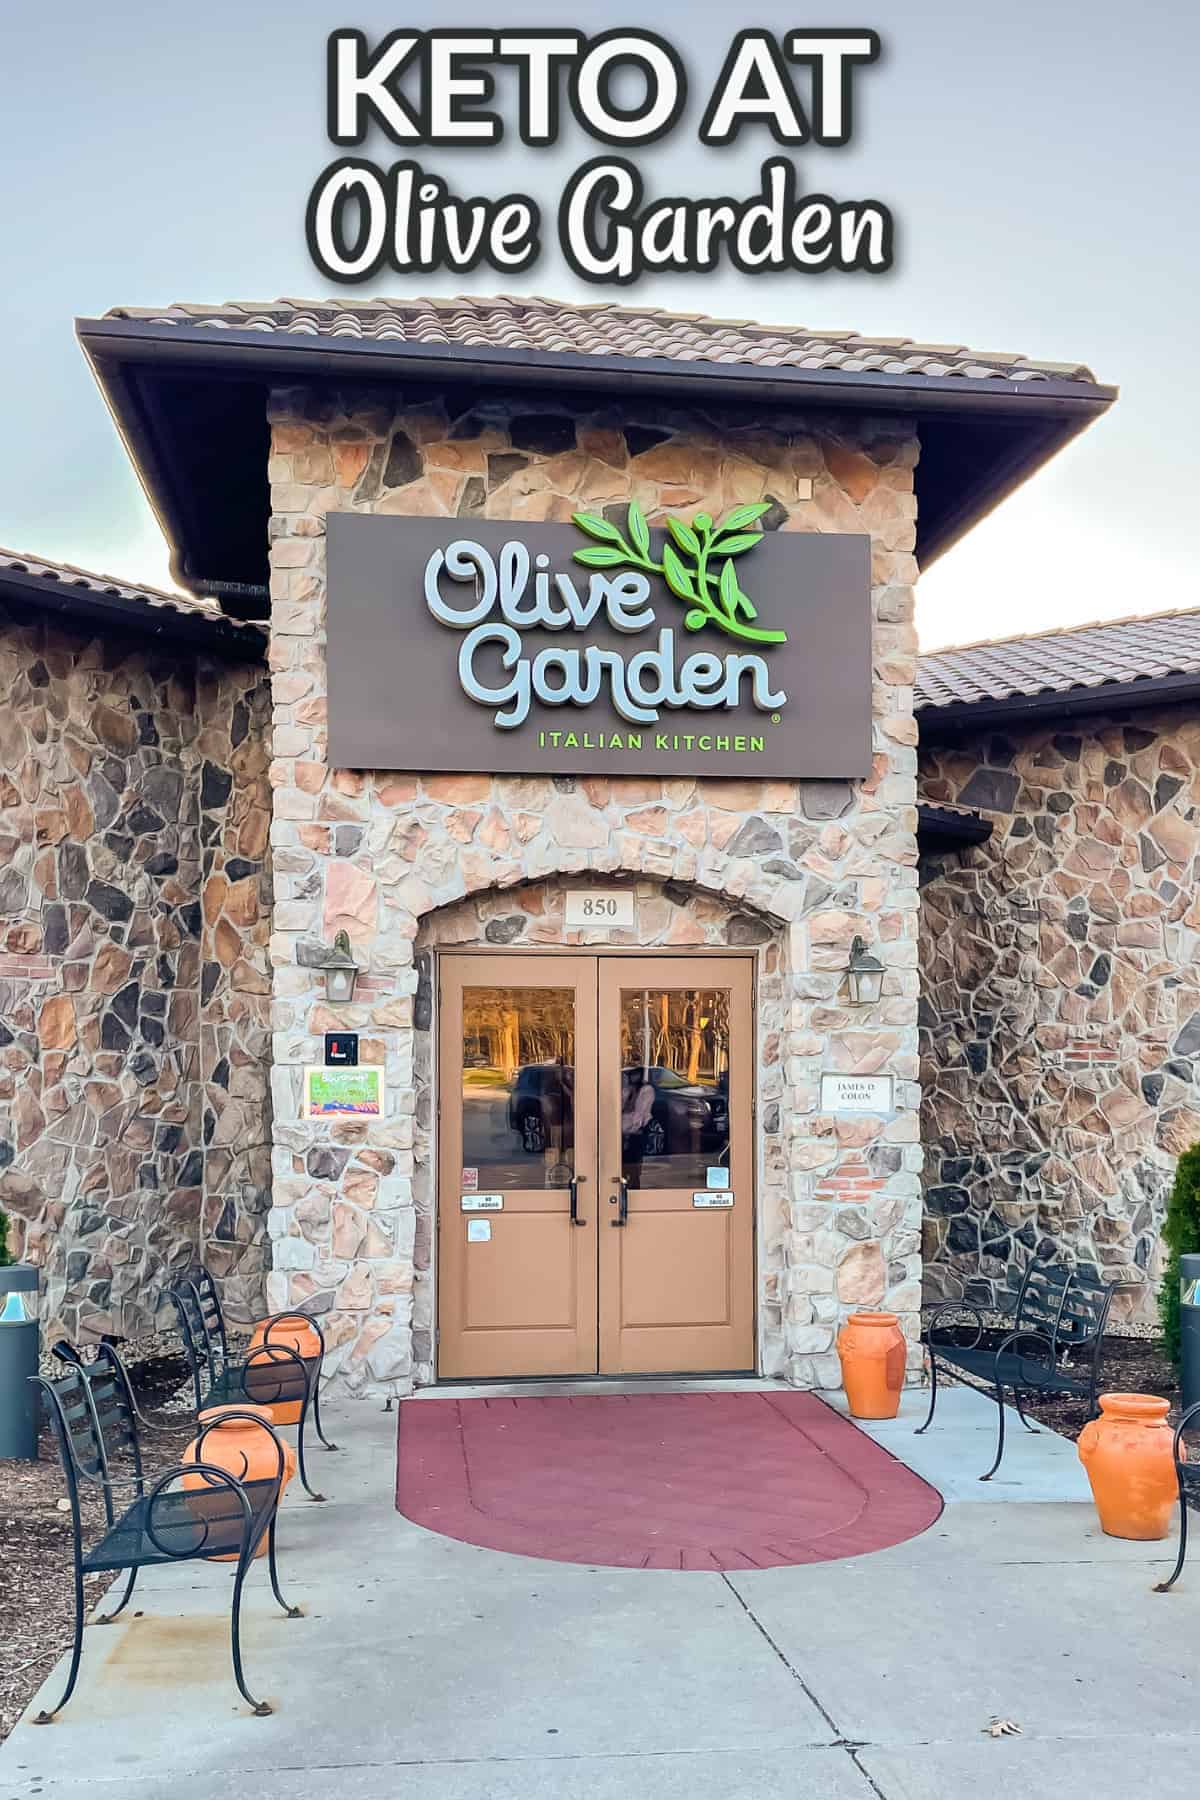 restaurant with keto at olive garden text overlay.